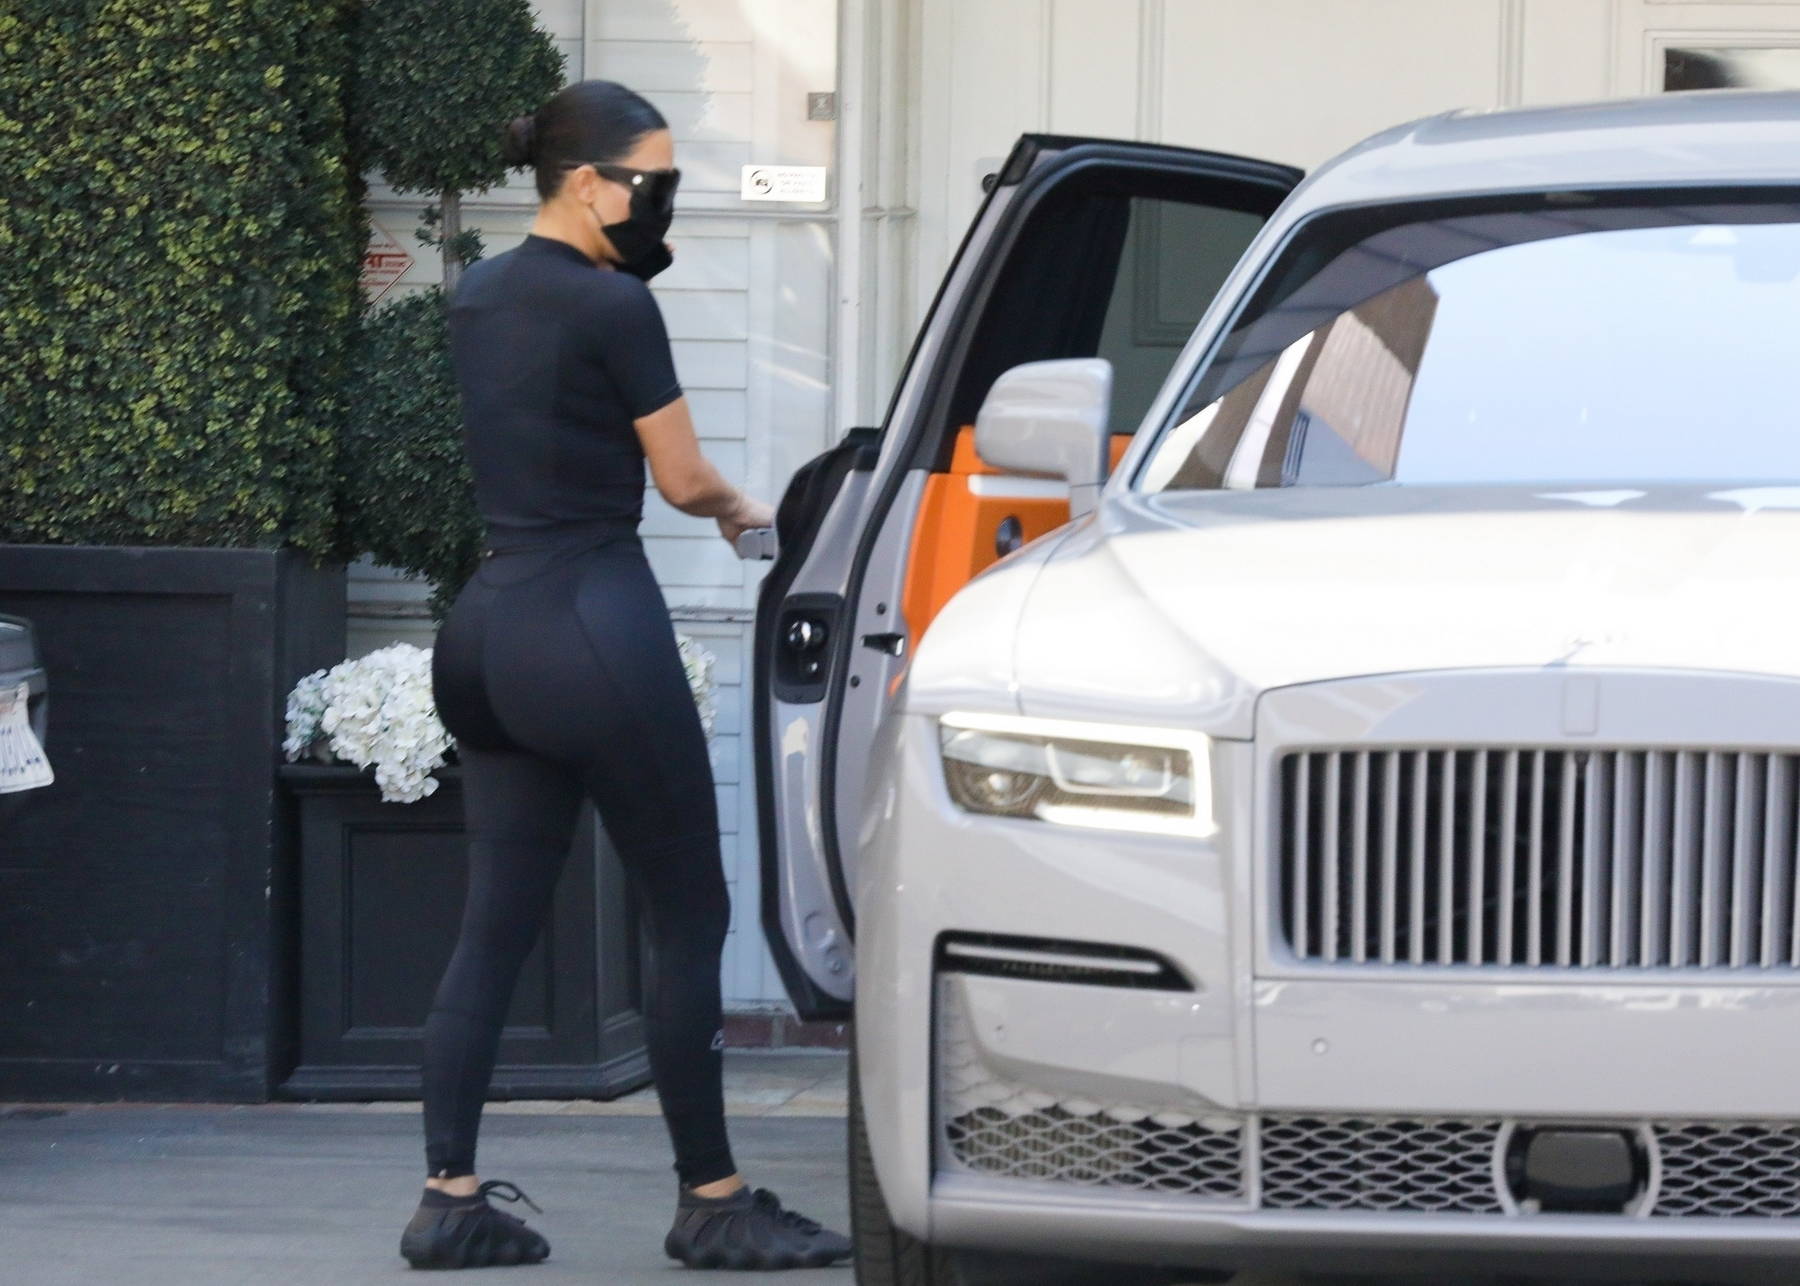 Kim Kardashian flaunts her curves in form-fitting black top and